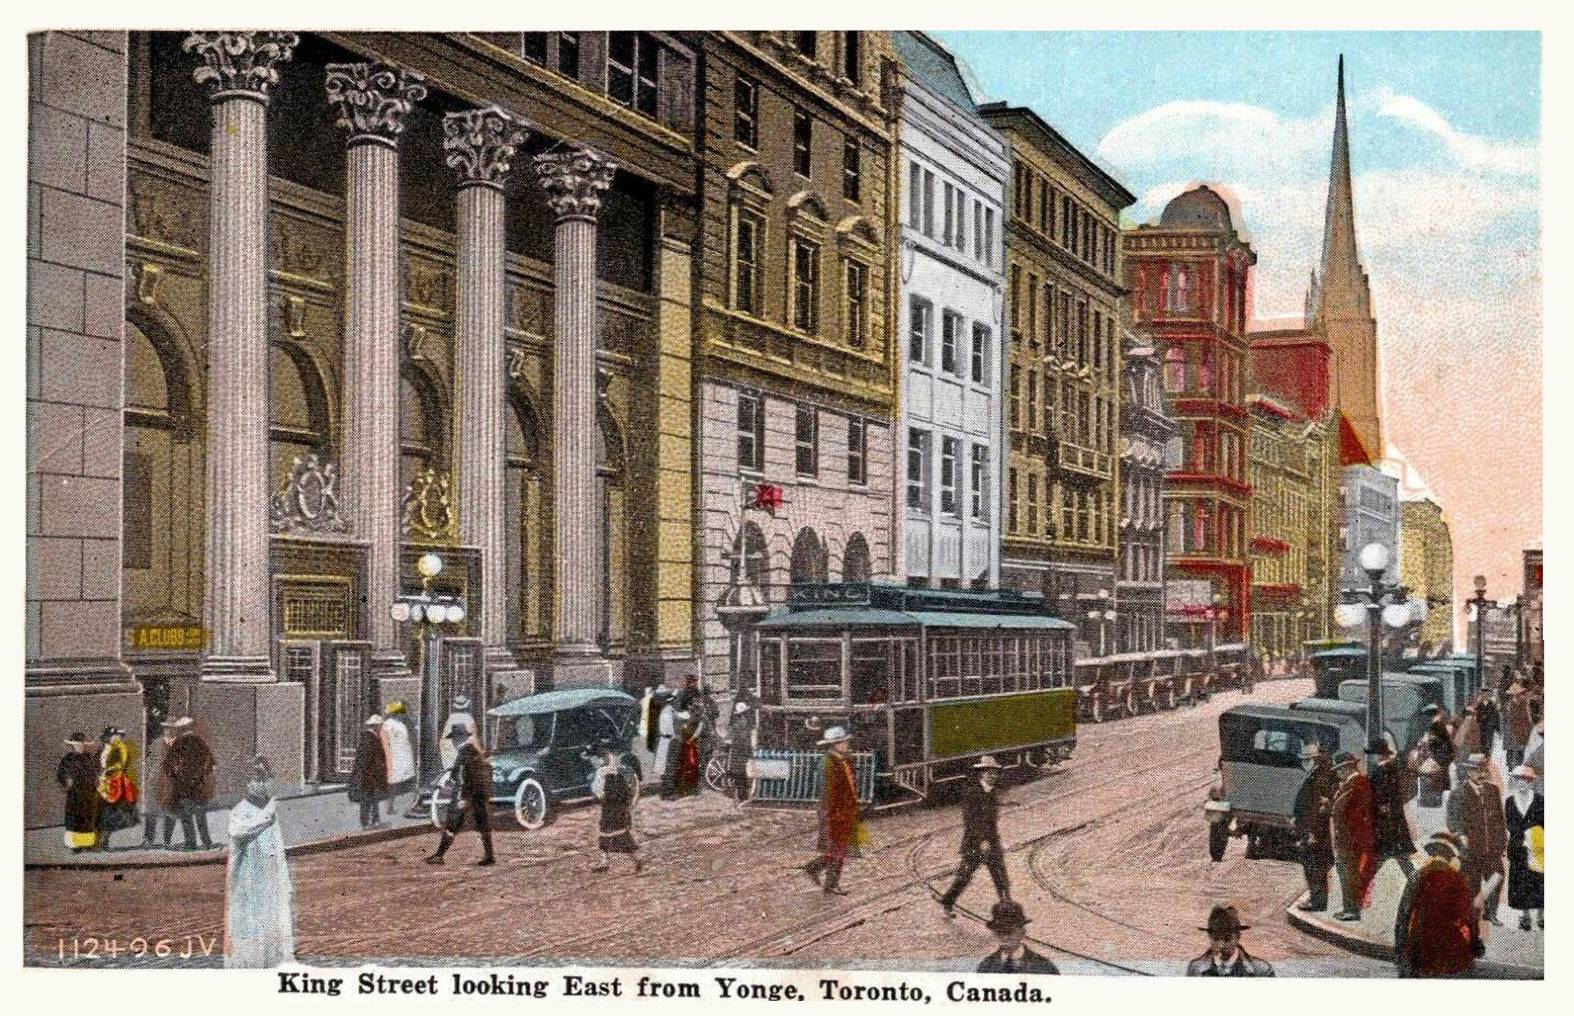 POSTCARD - TORONTO - KING STREET - LOOKING E FROM YONGE - ALMOST GROUND LEVEL - STREETCAR - CARS - TRAFFIC COP - TINTED - 1910s